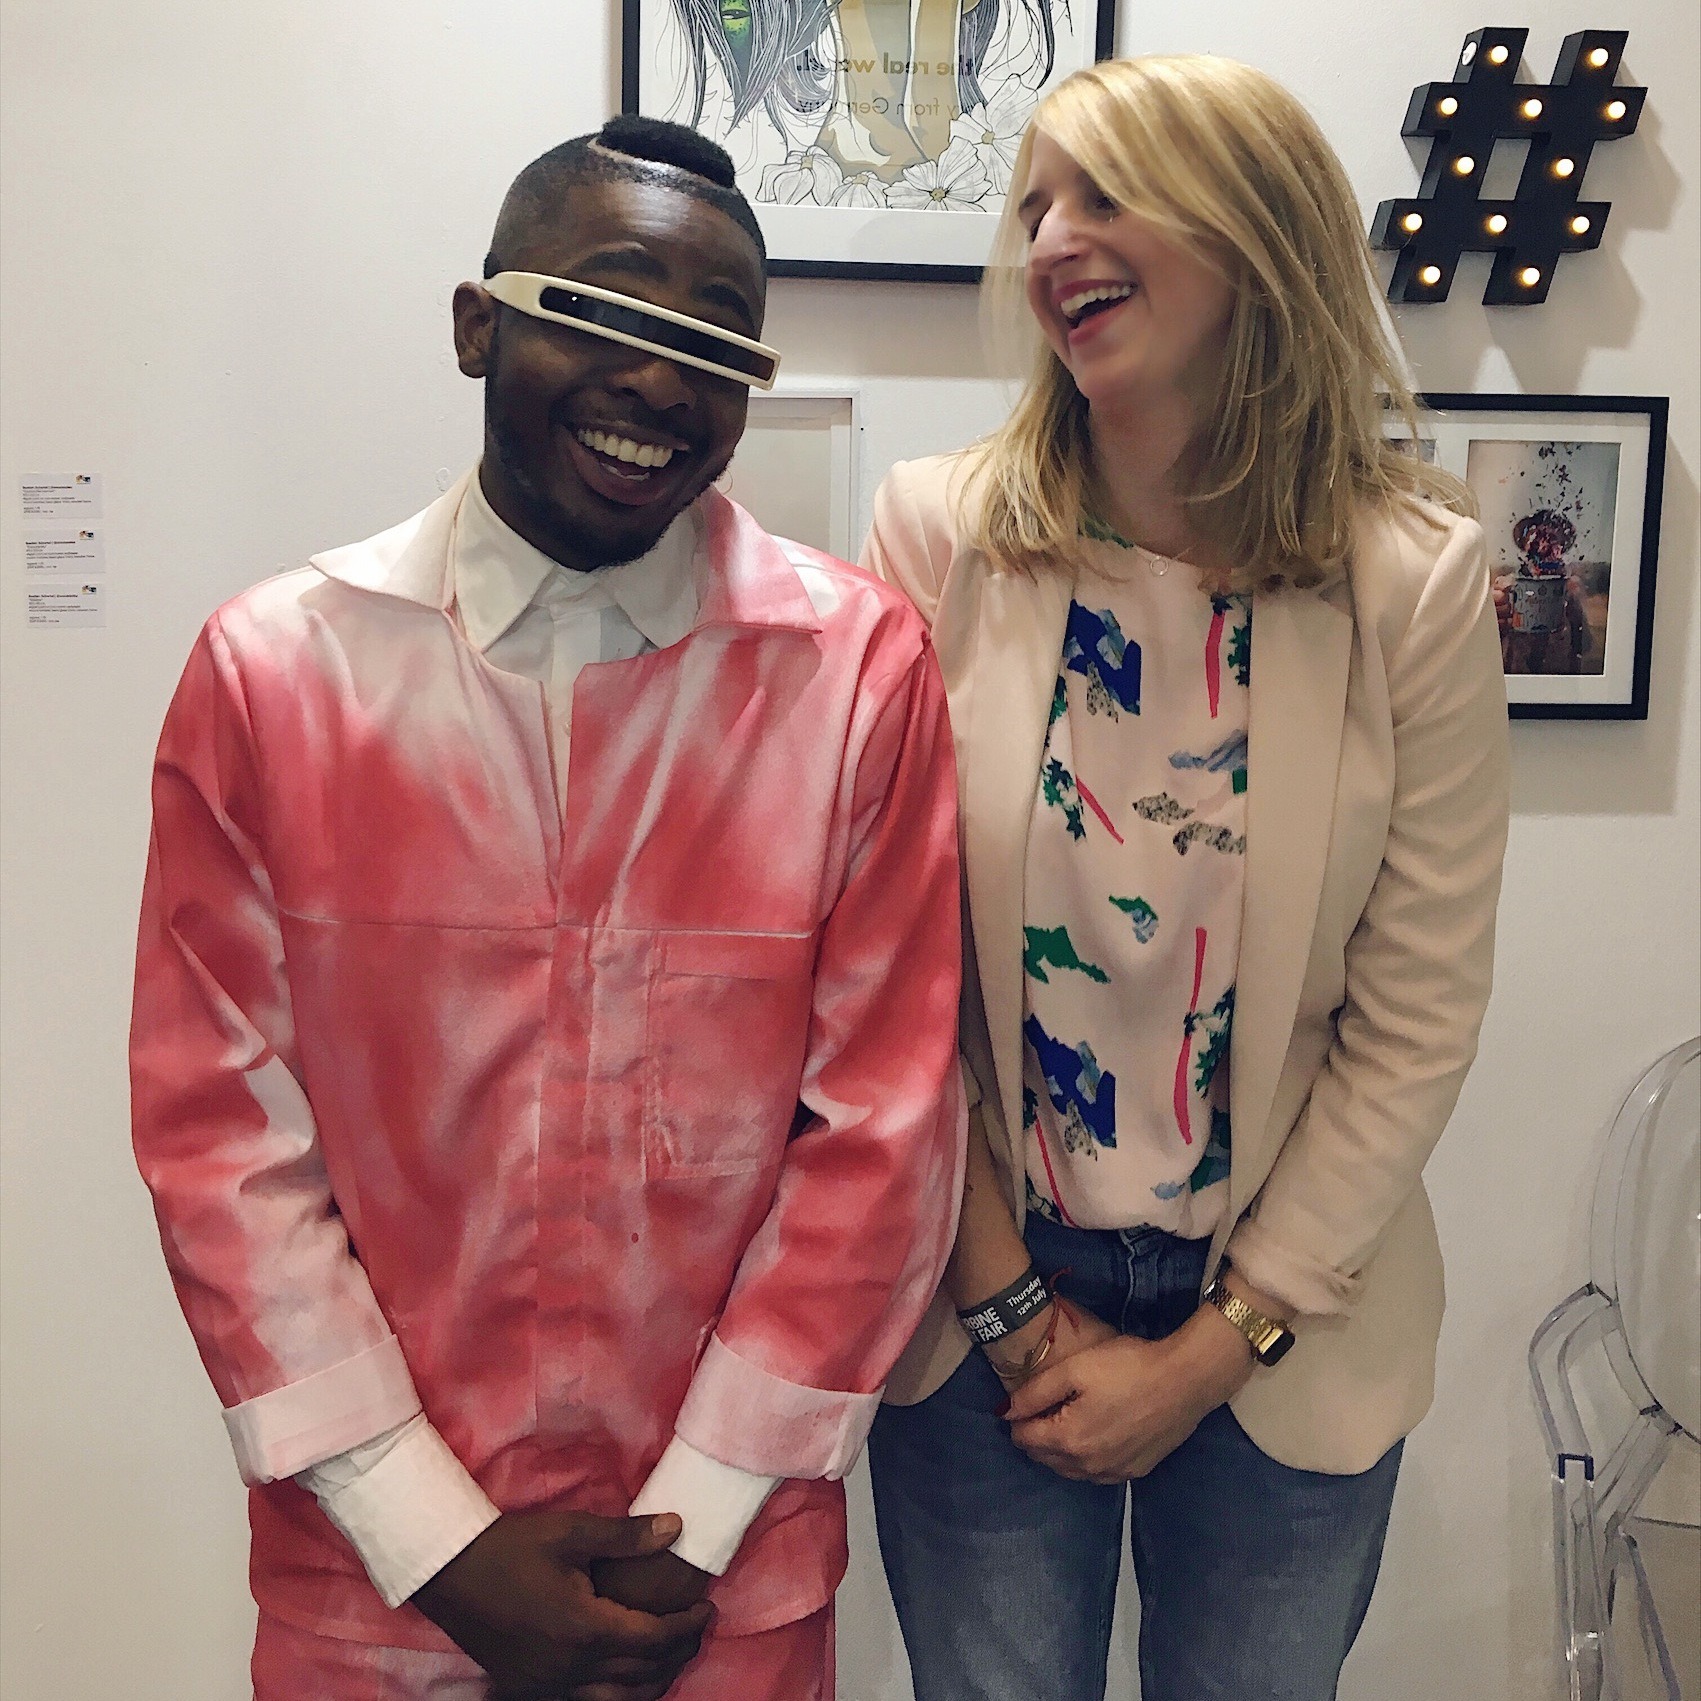 man with a future outfit standing next to social media art gallery owner anna stoffel